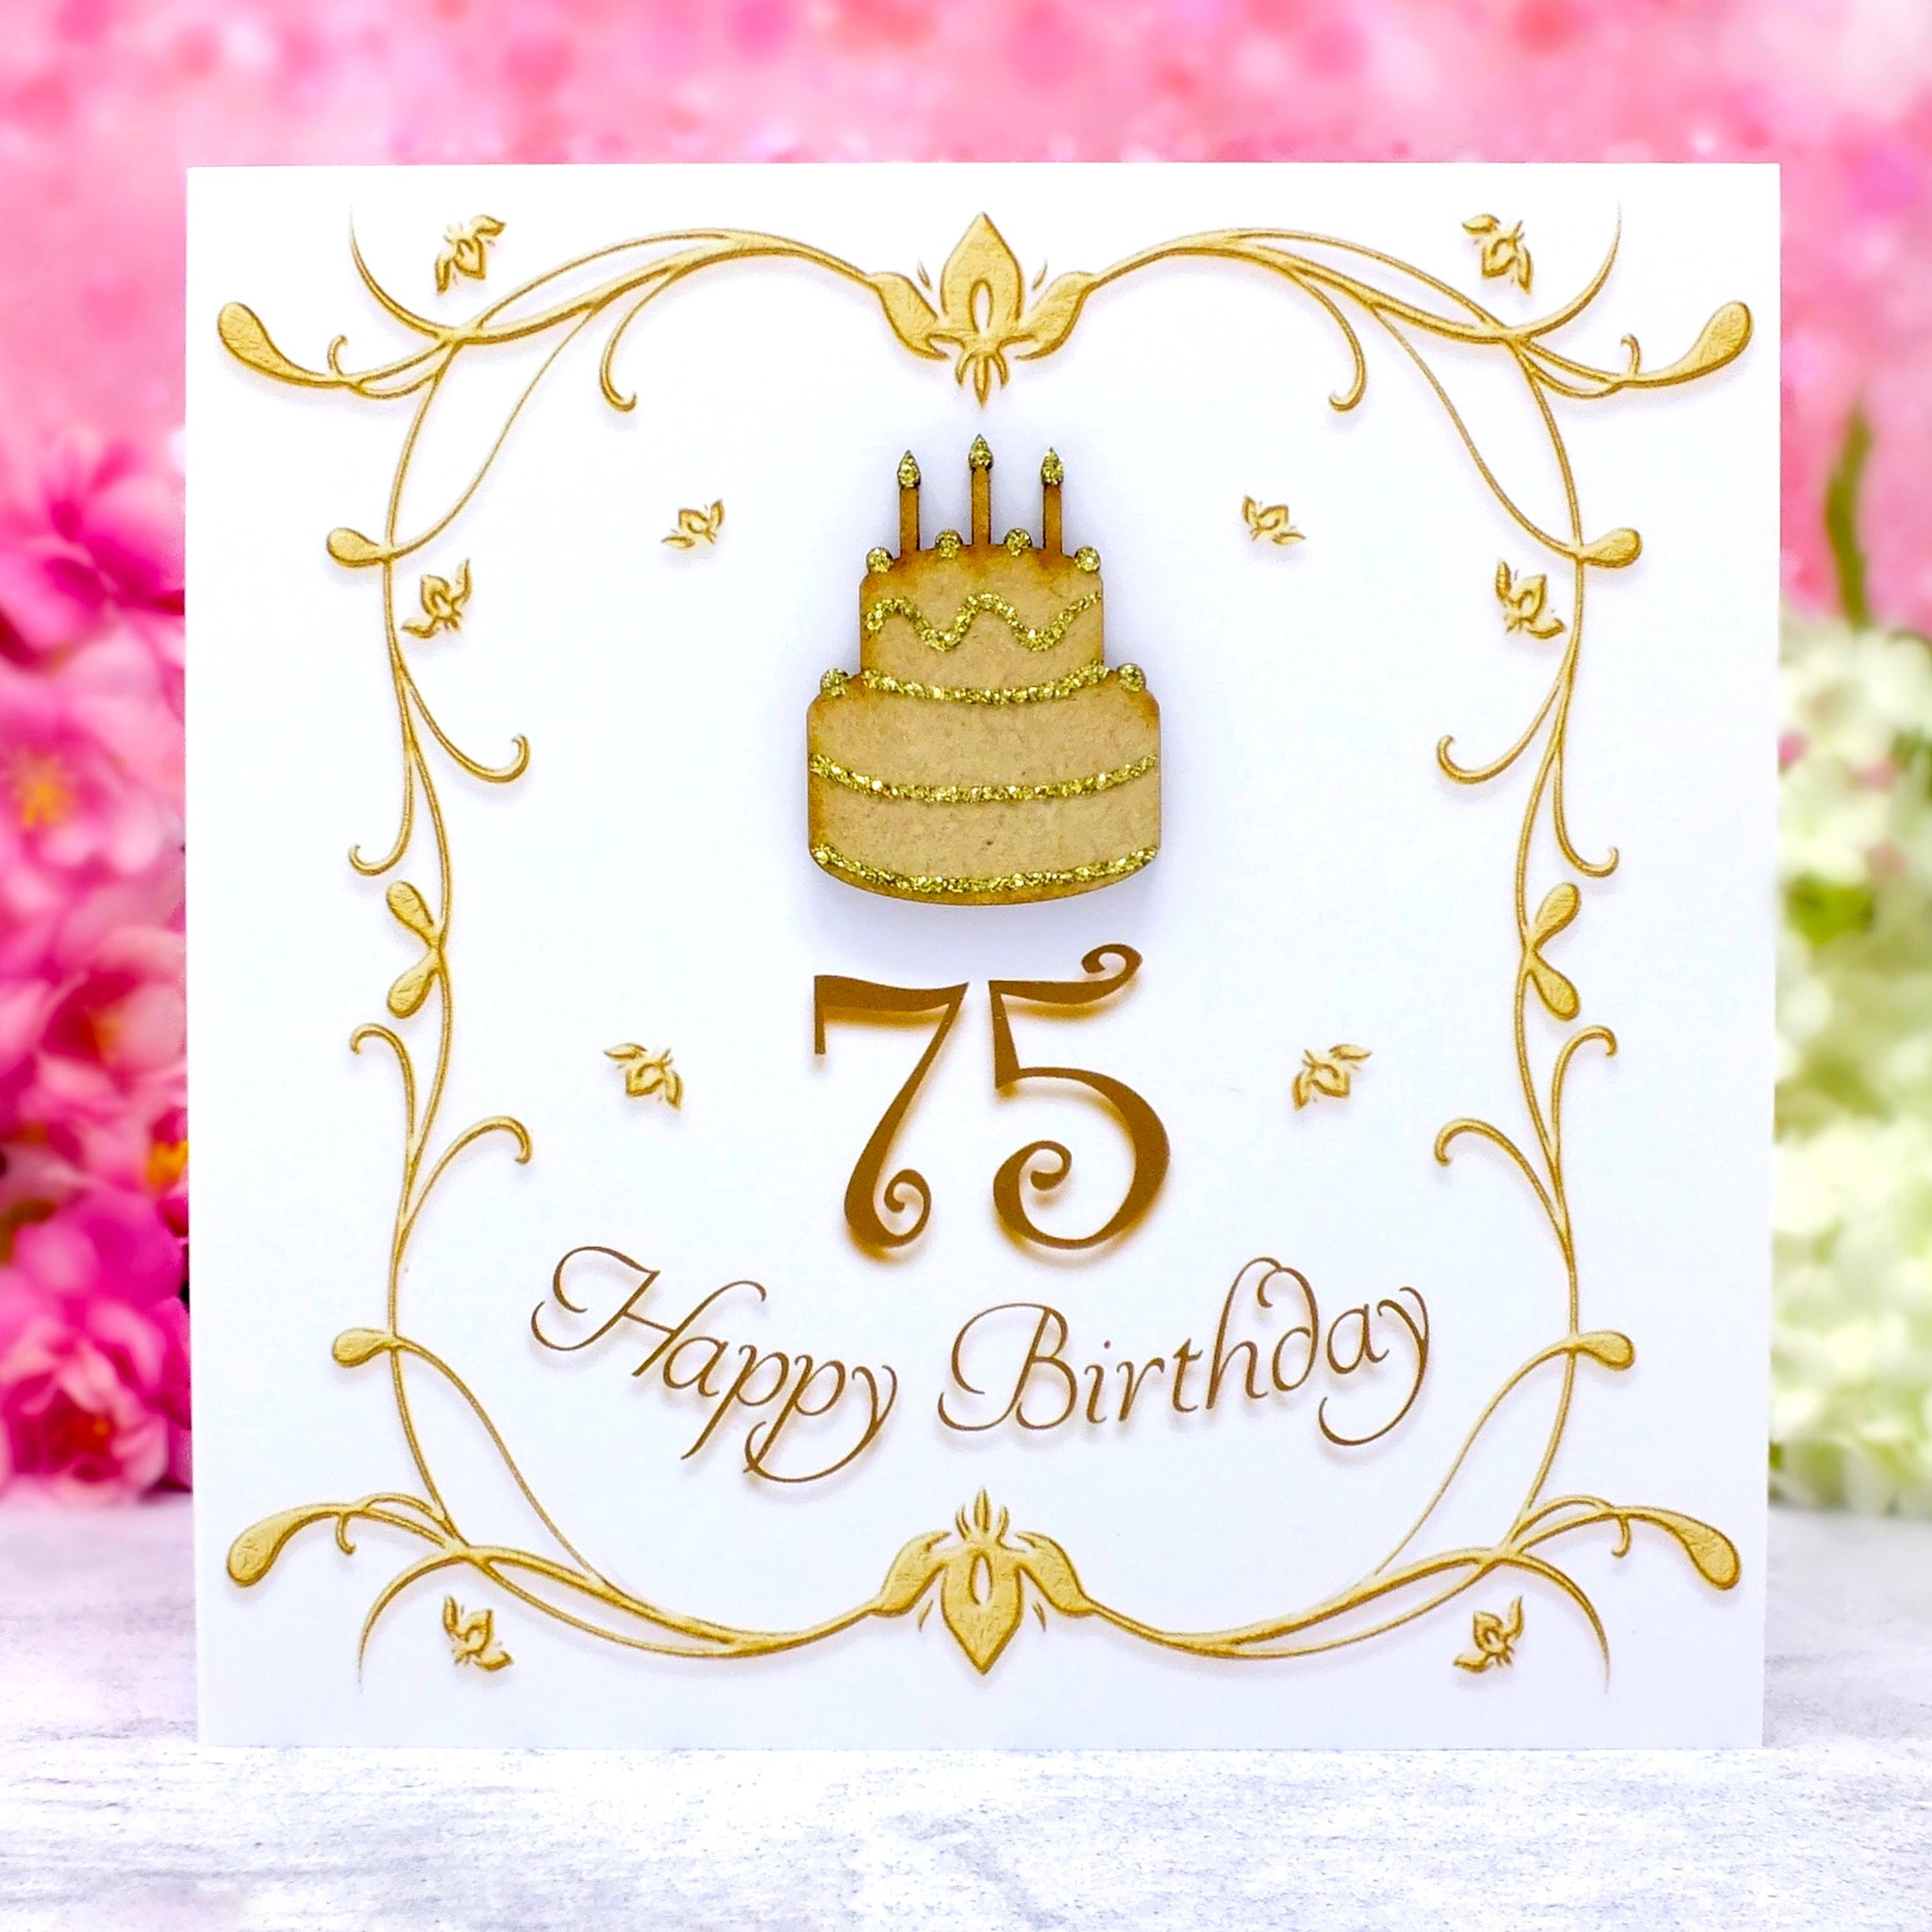 legend since 1948 cake topper 75th birthday happy birthday cake topper men  and women cheer 75 years old handmade black glitter cake decoration by  Migeaks - Shop Online for Kitchen in Australia